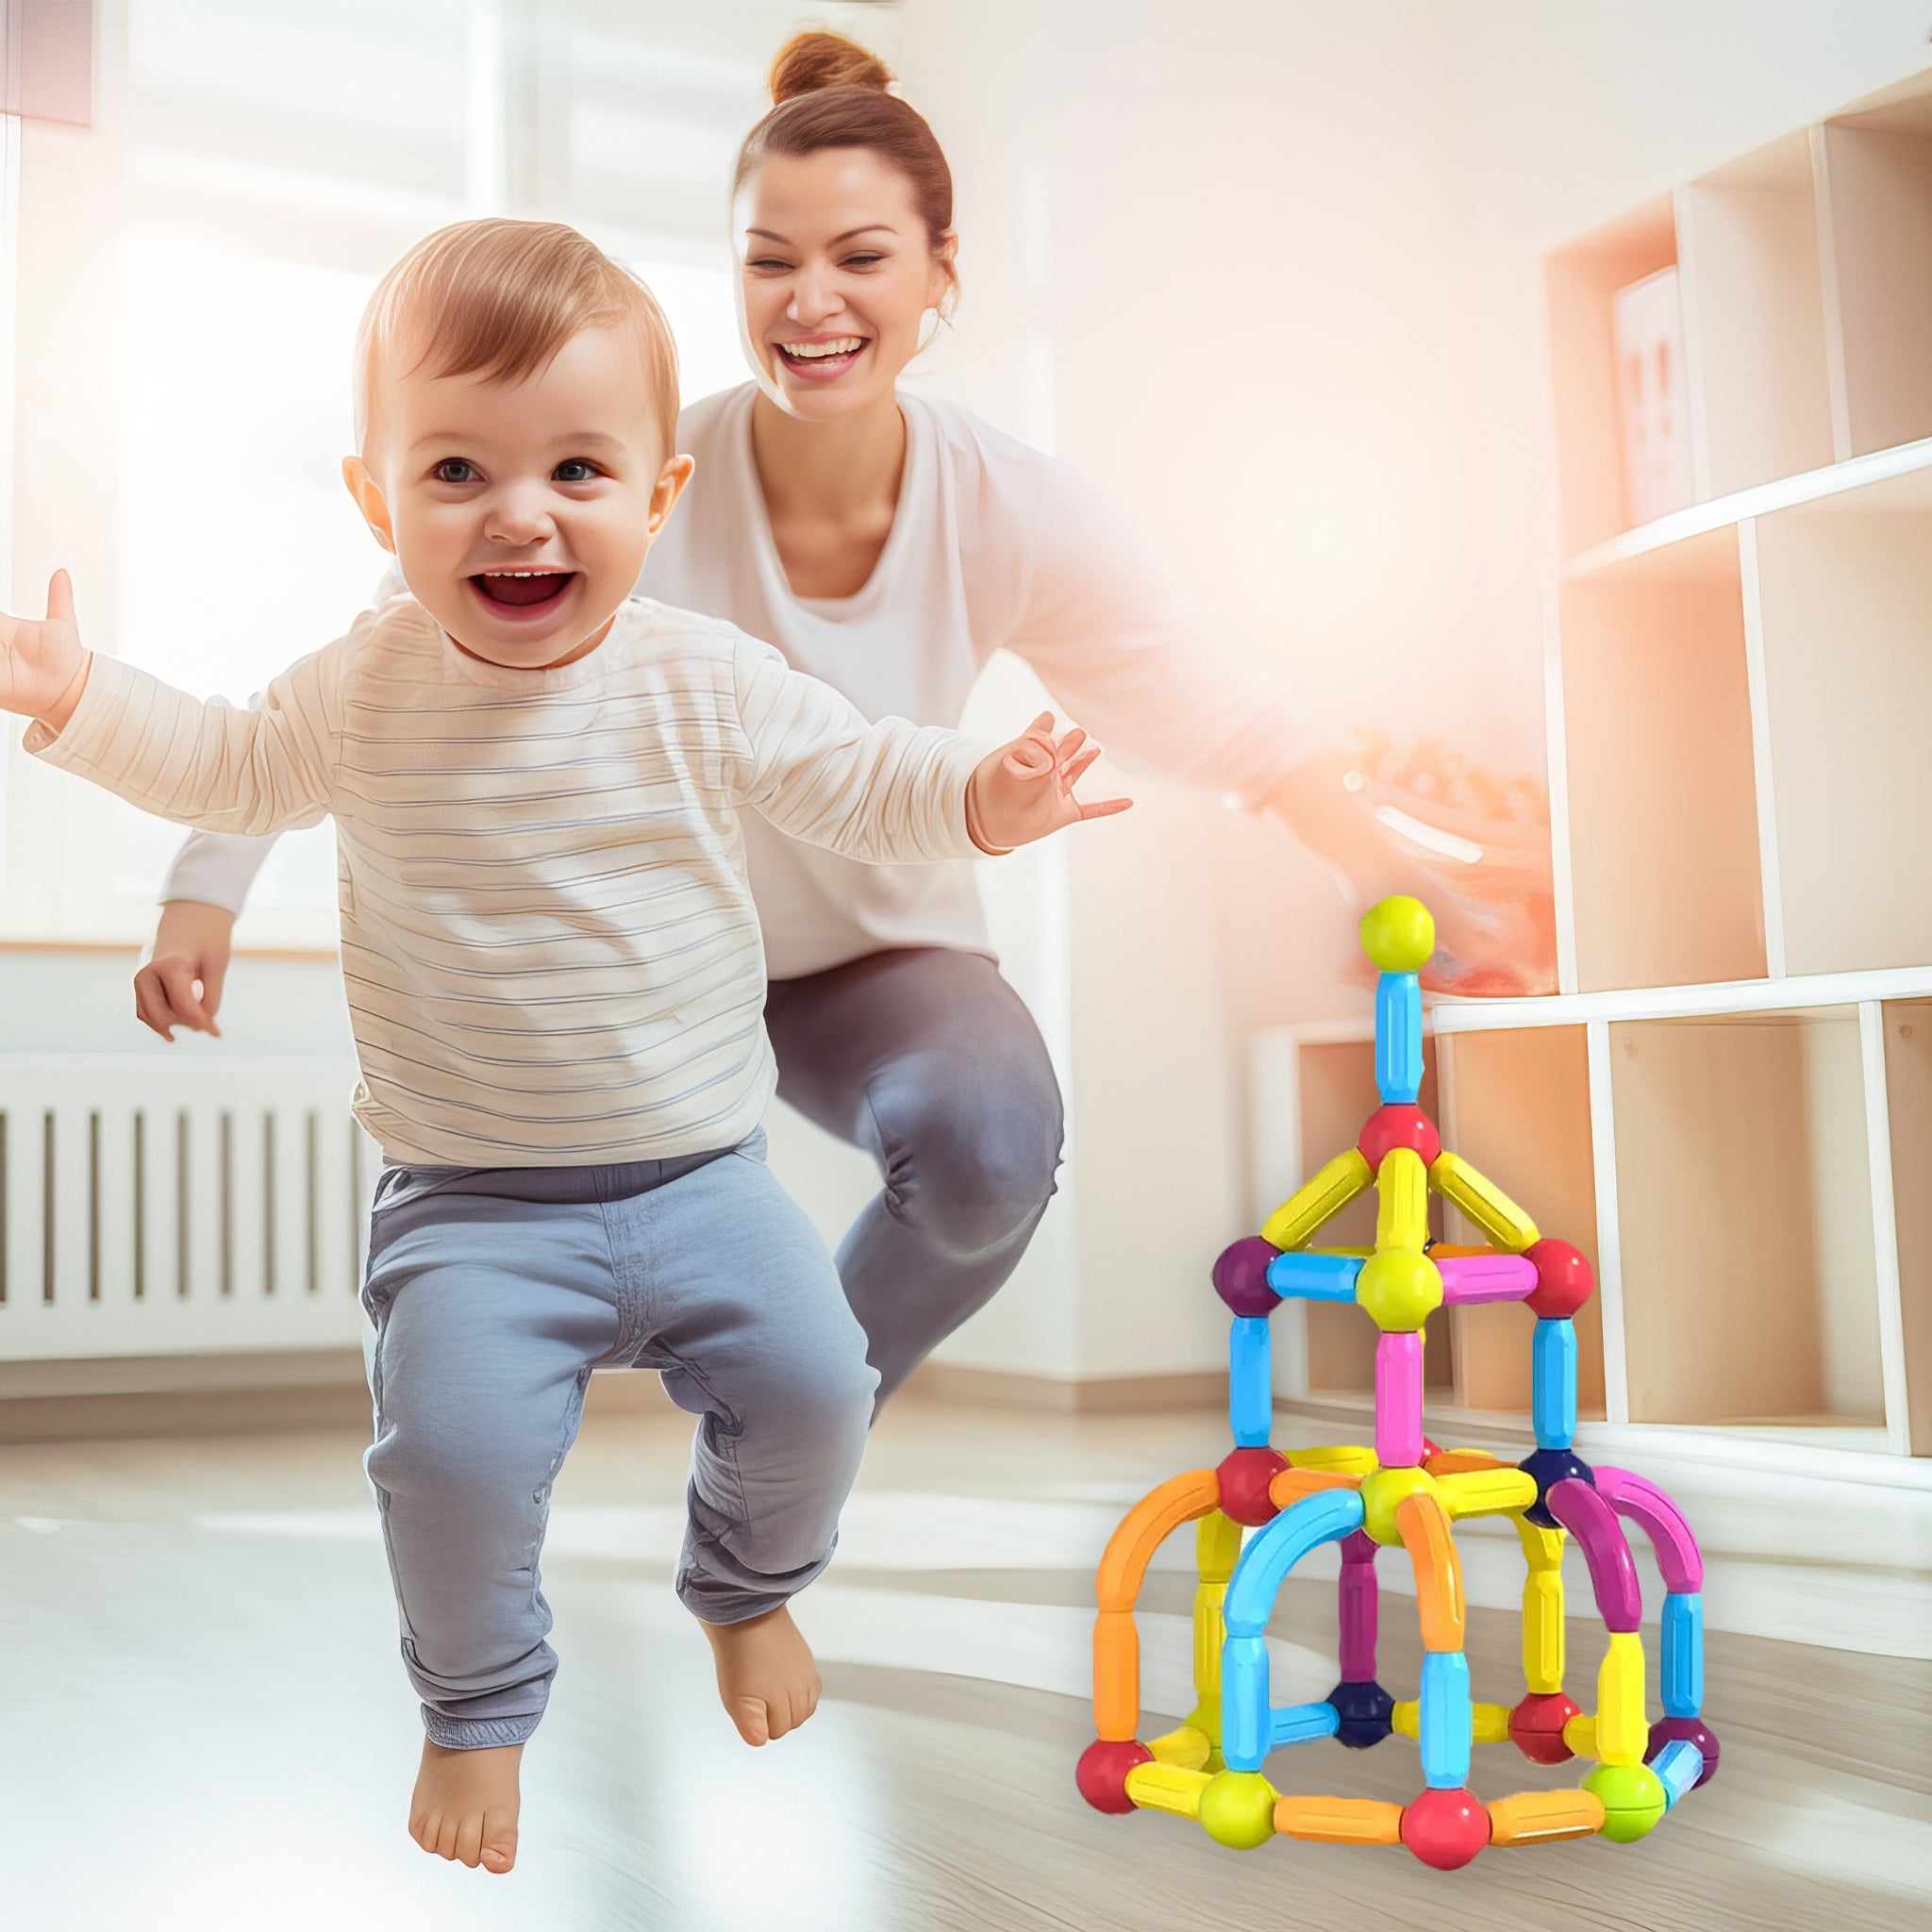 A toddler joyfully walking towards a colorful Soulful Trading Magnetic Sticks Building Blocks structure, with a smiling woman encouraging him from behind in a bright room.